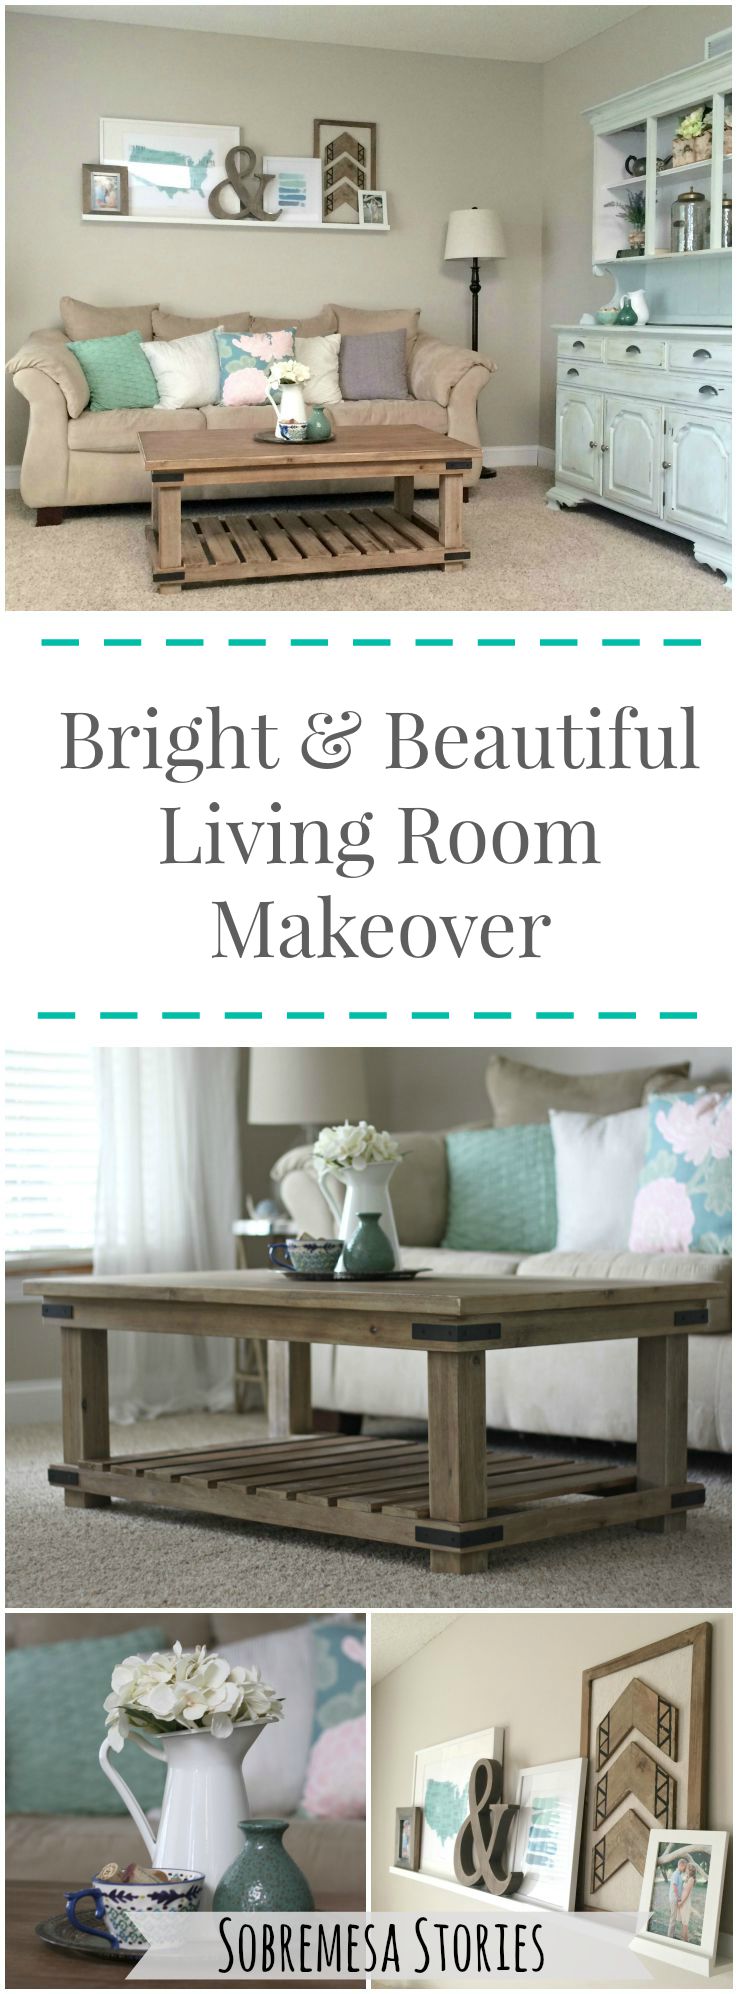 Bright And Beautiful Living Room Reveal With Rustic Wood Accents And White, Blues, And Greens - Sobremesa Stories Blog